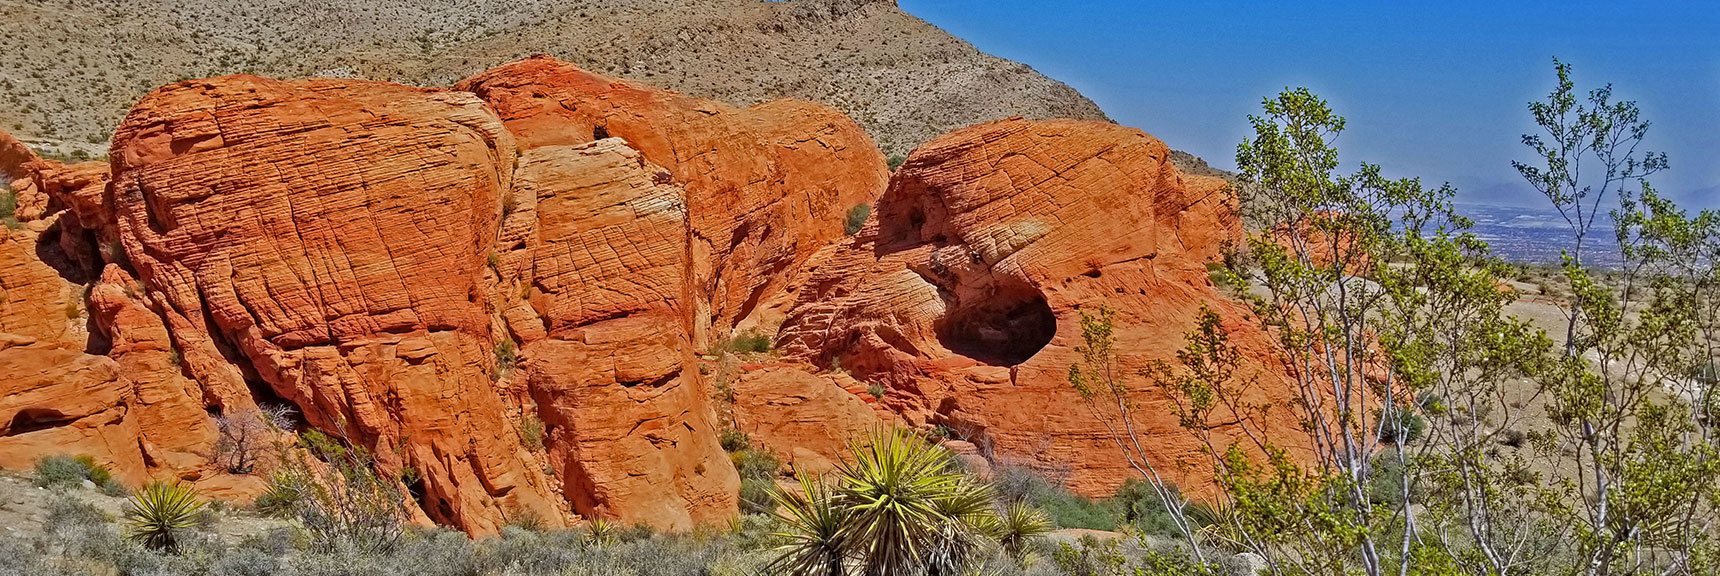 Another Niche Formation in the Red Rock, Back at First Little Red Rock Area. | Little Red Rock Las Vegas, Nevada, Near La Madre Mountains Wilderness